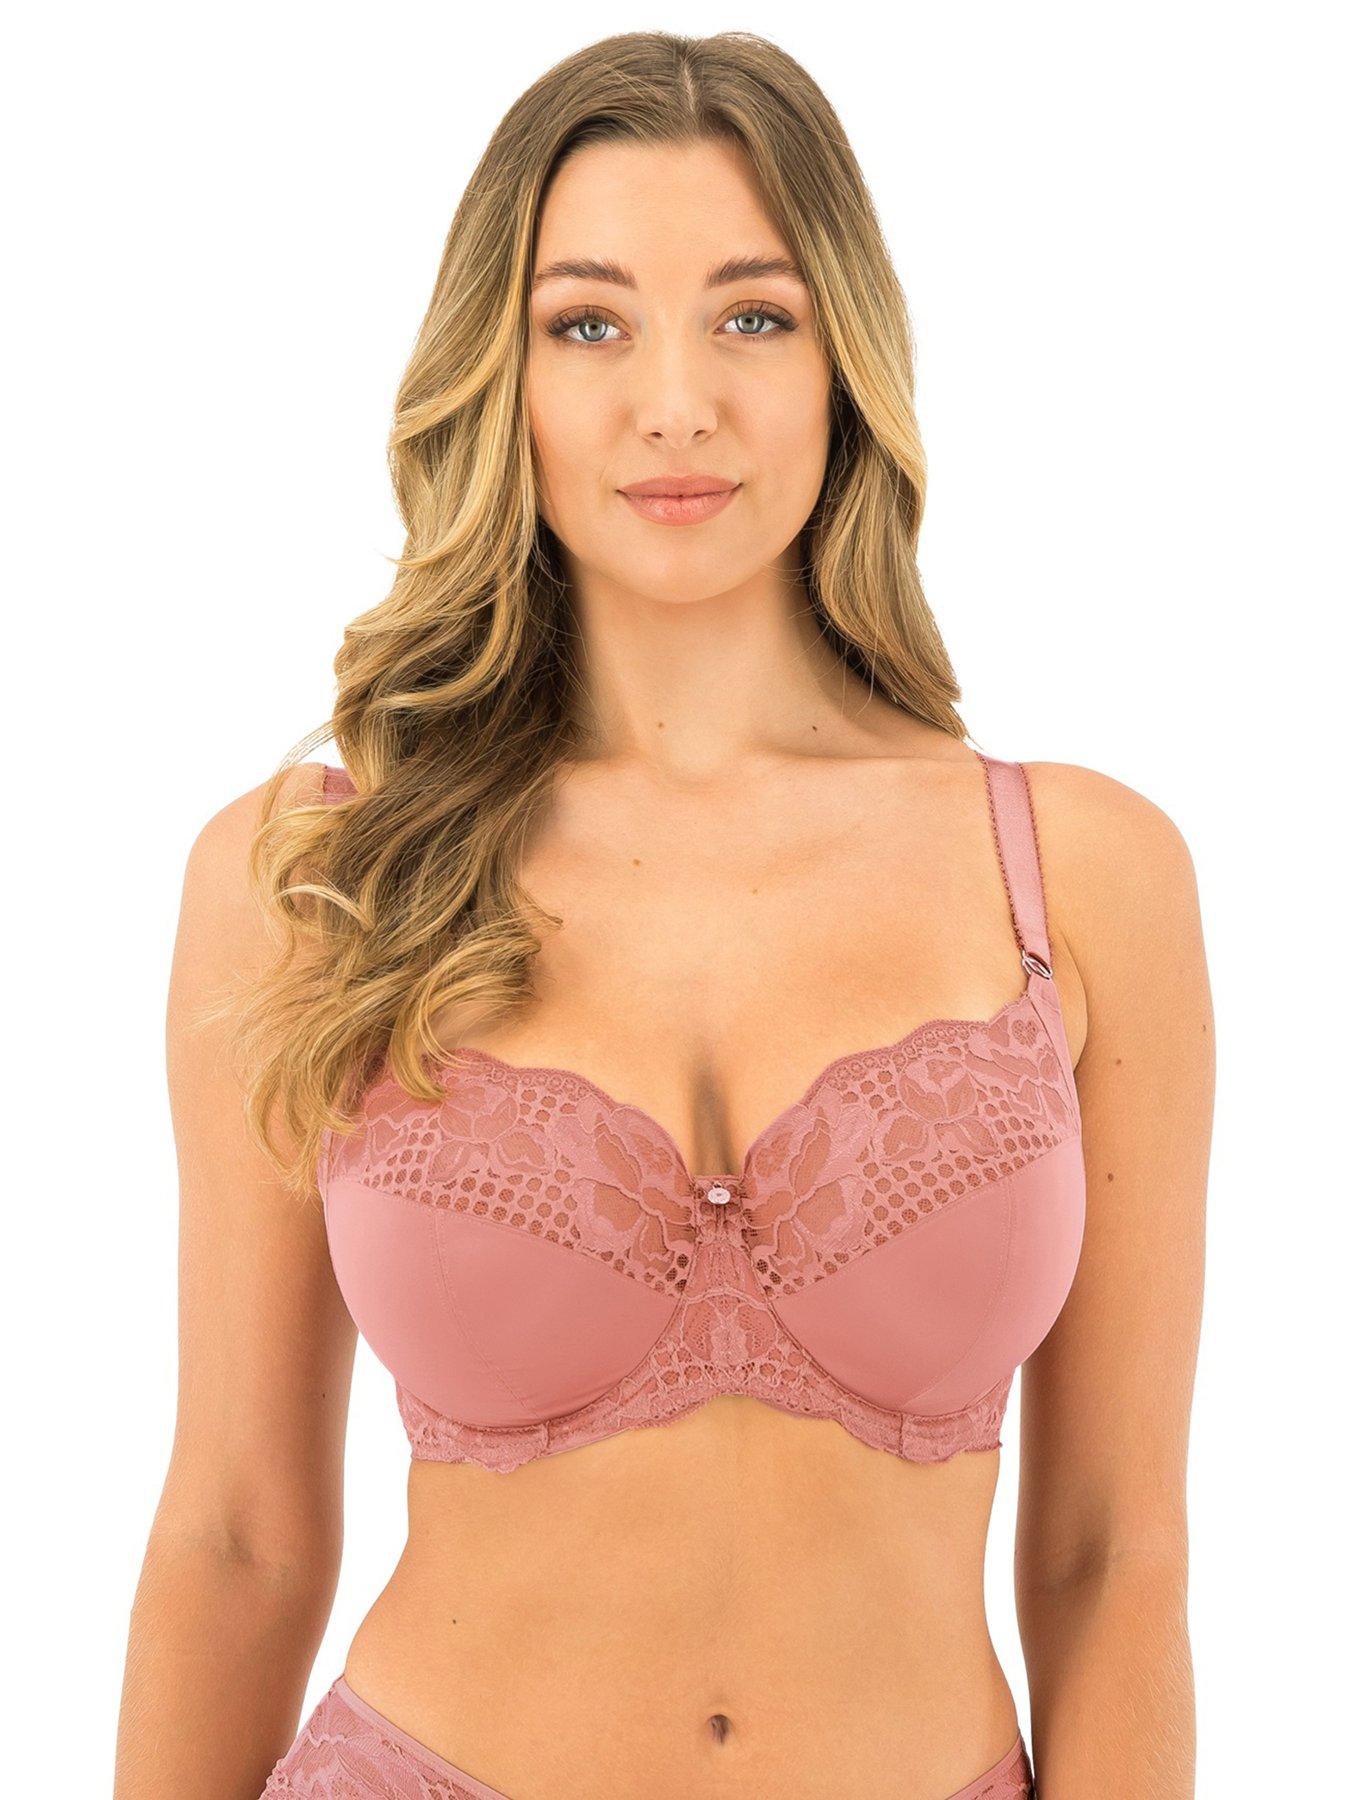 Tulle Lace 336 - 8 Passion lace – Bra Builders